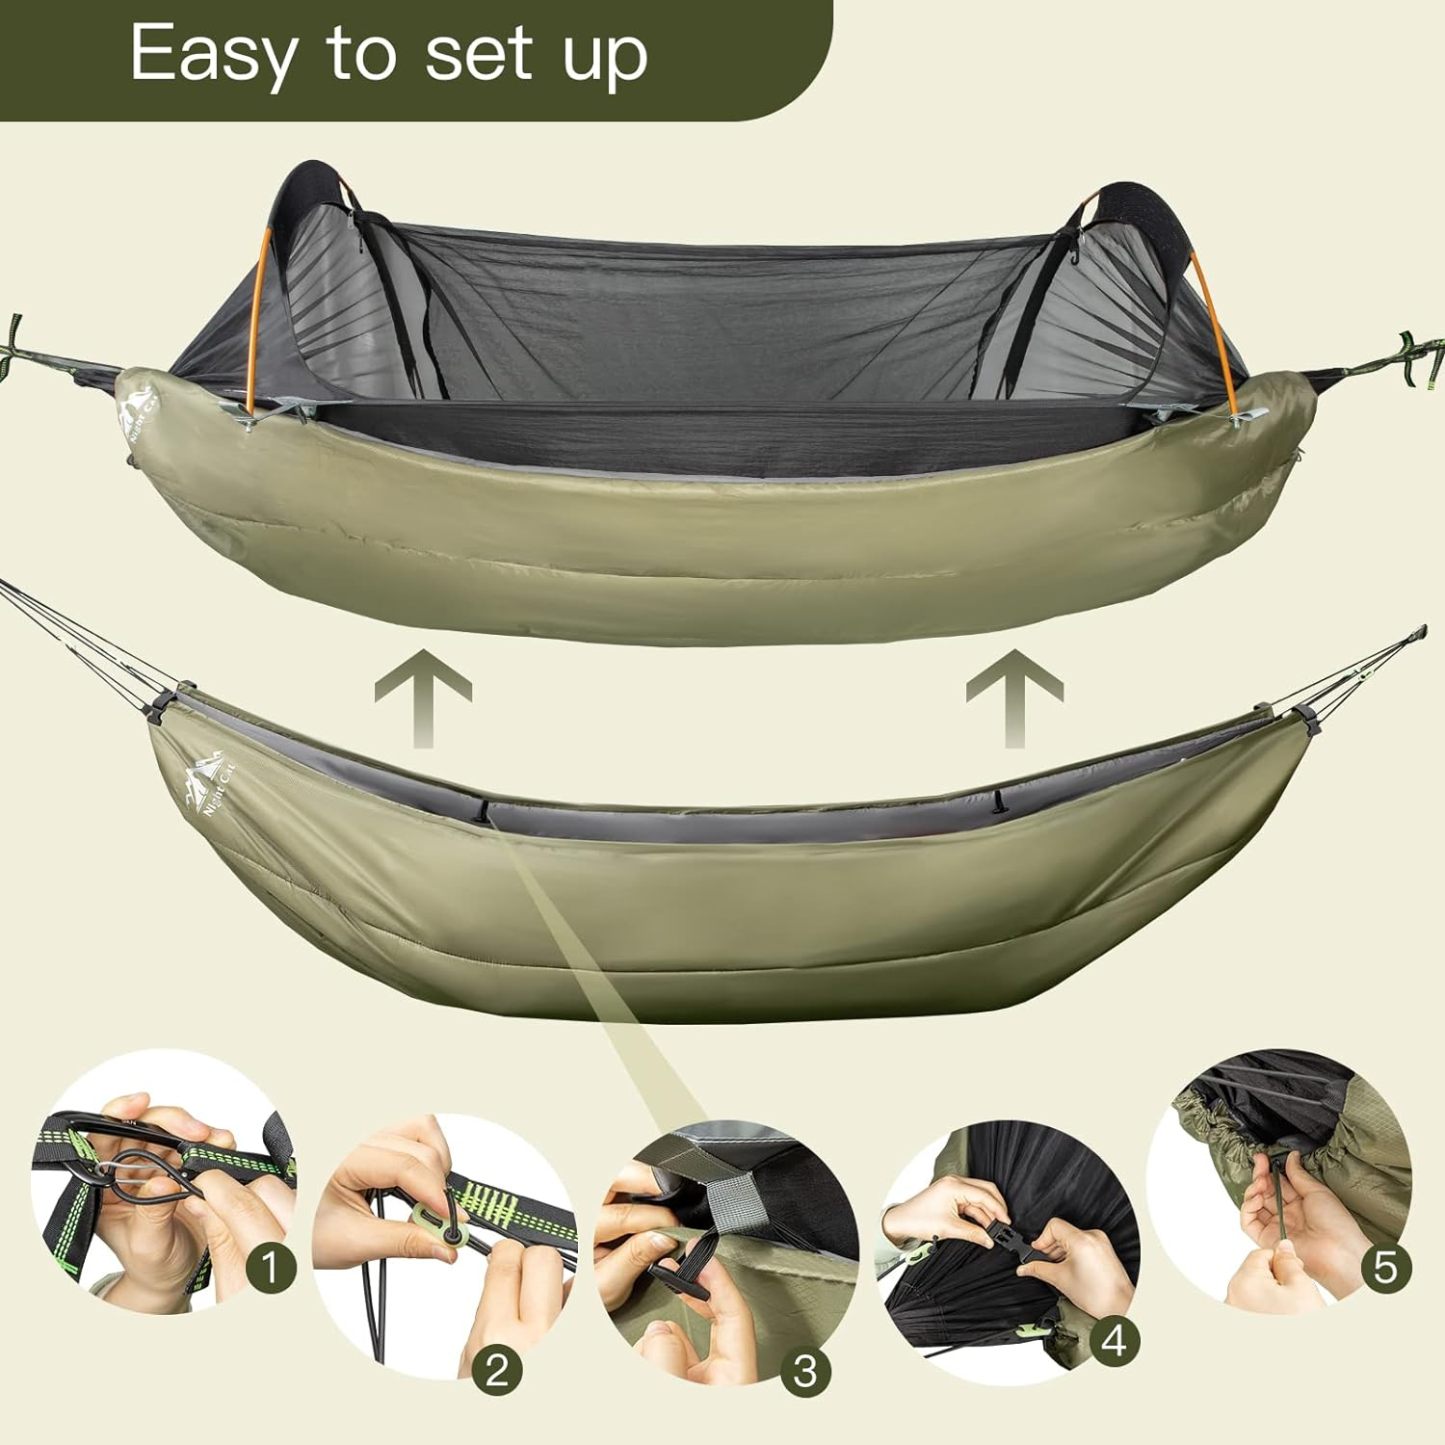 Night Cat 3 in 1 Hammock Tent with Hammock Underquilt for 1 Person Perfect Hammock Combo Set